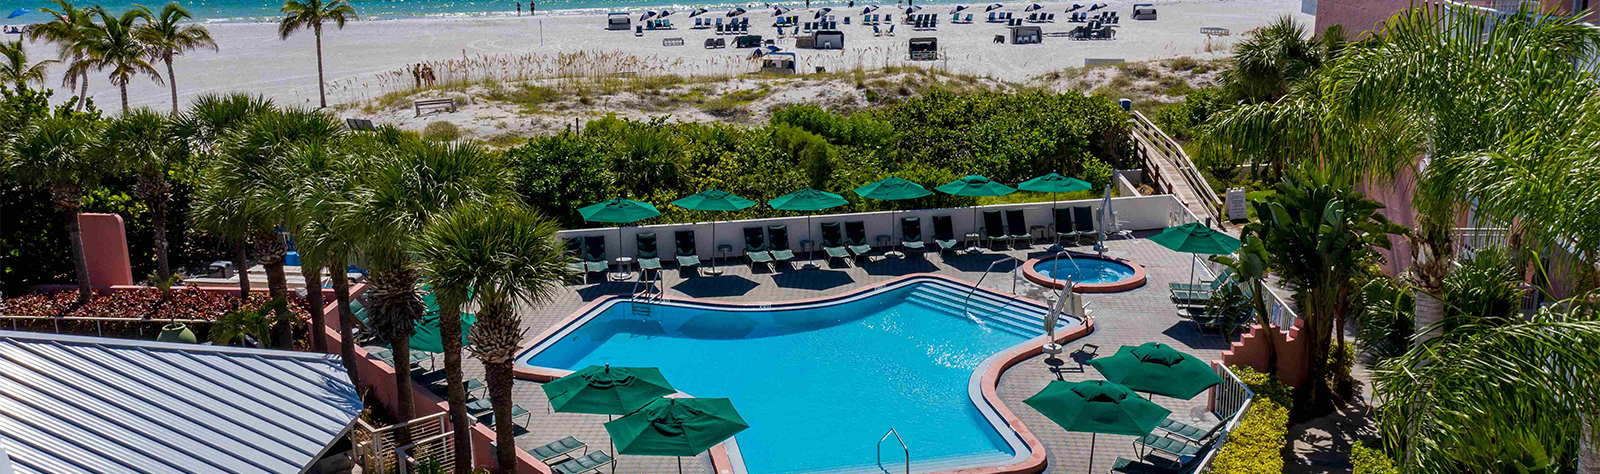 Beach House Suites, Florida - Offers